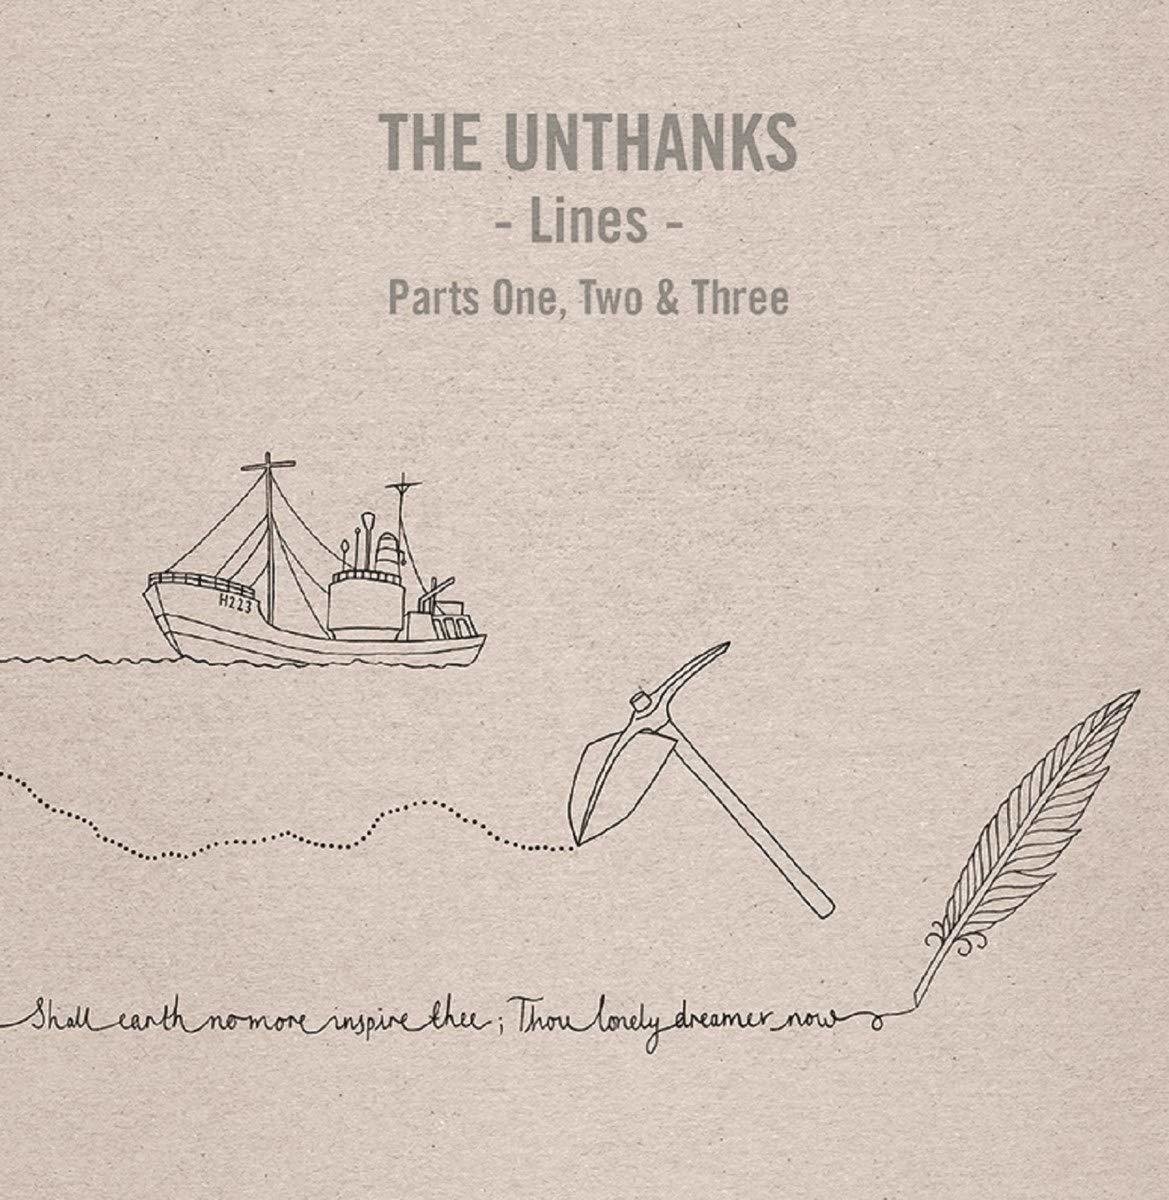 Vinylplade The Unthanks - Lines - Parts One, Two And Three (3 x 10" Vinyl)